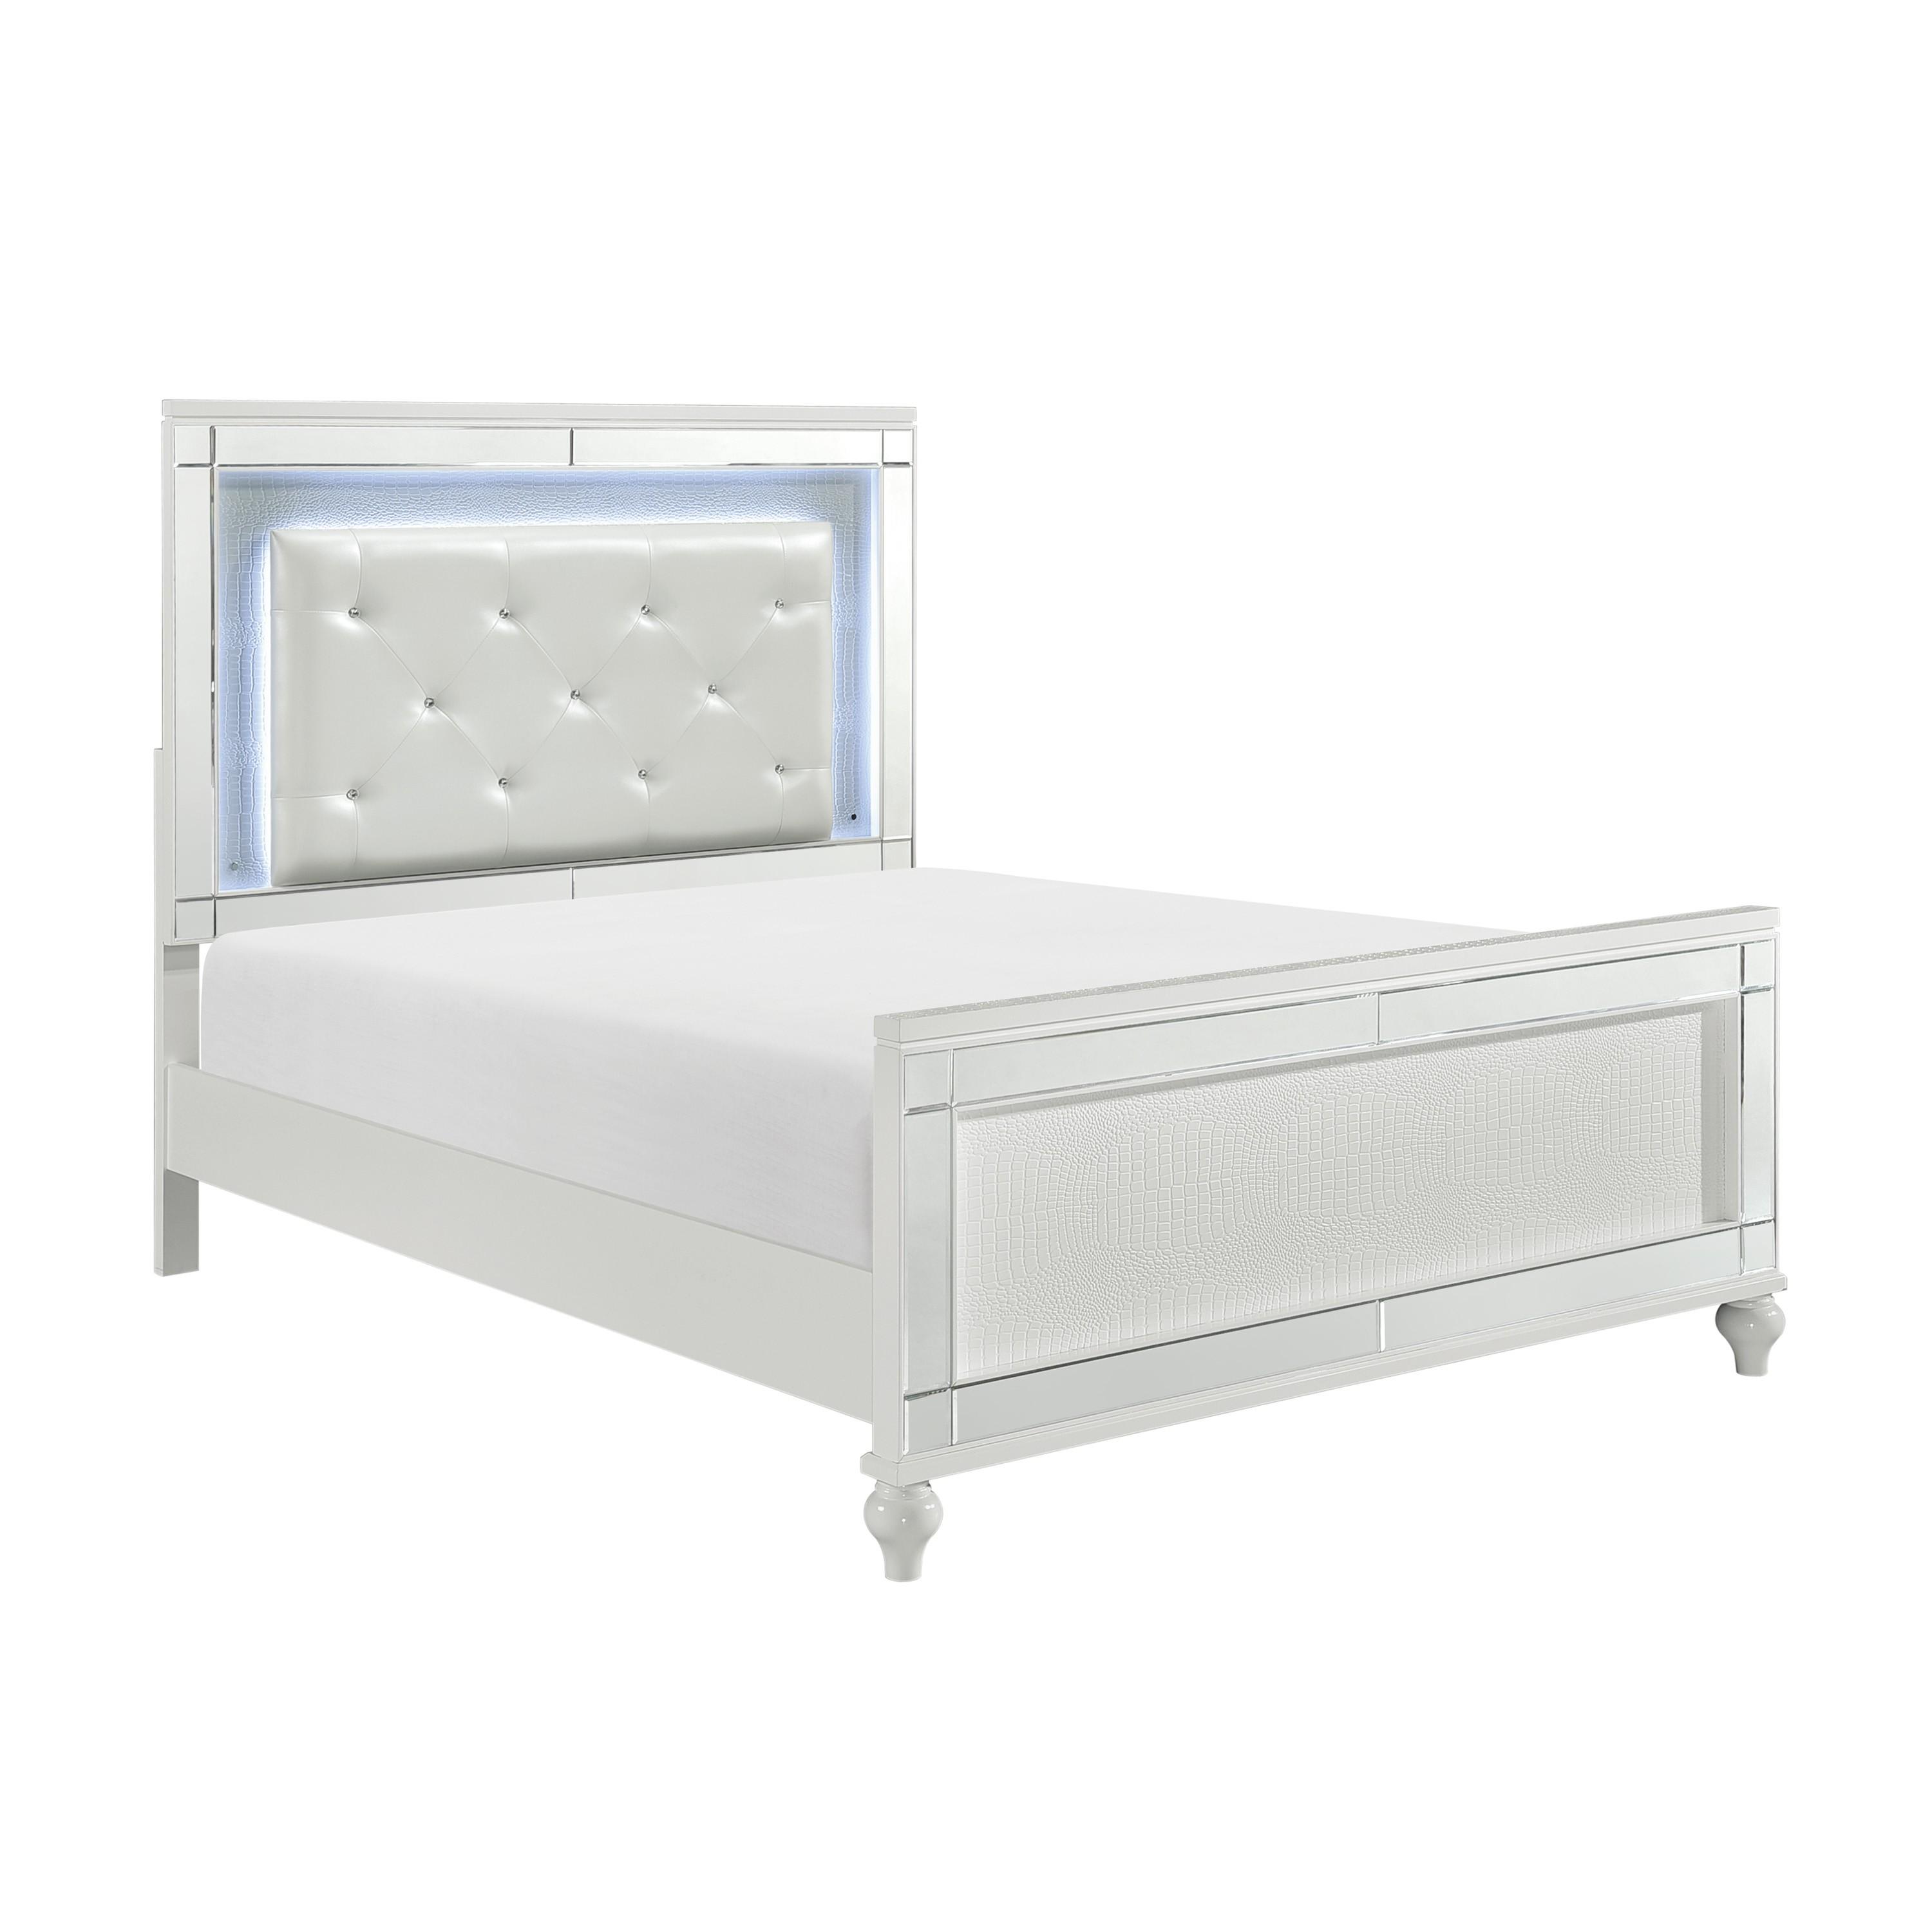 Modern Bed 1845KLED-1CK* Alonza 1845KLED-1CK* in White Faux Leather